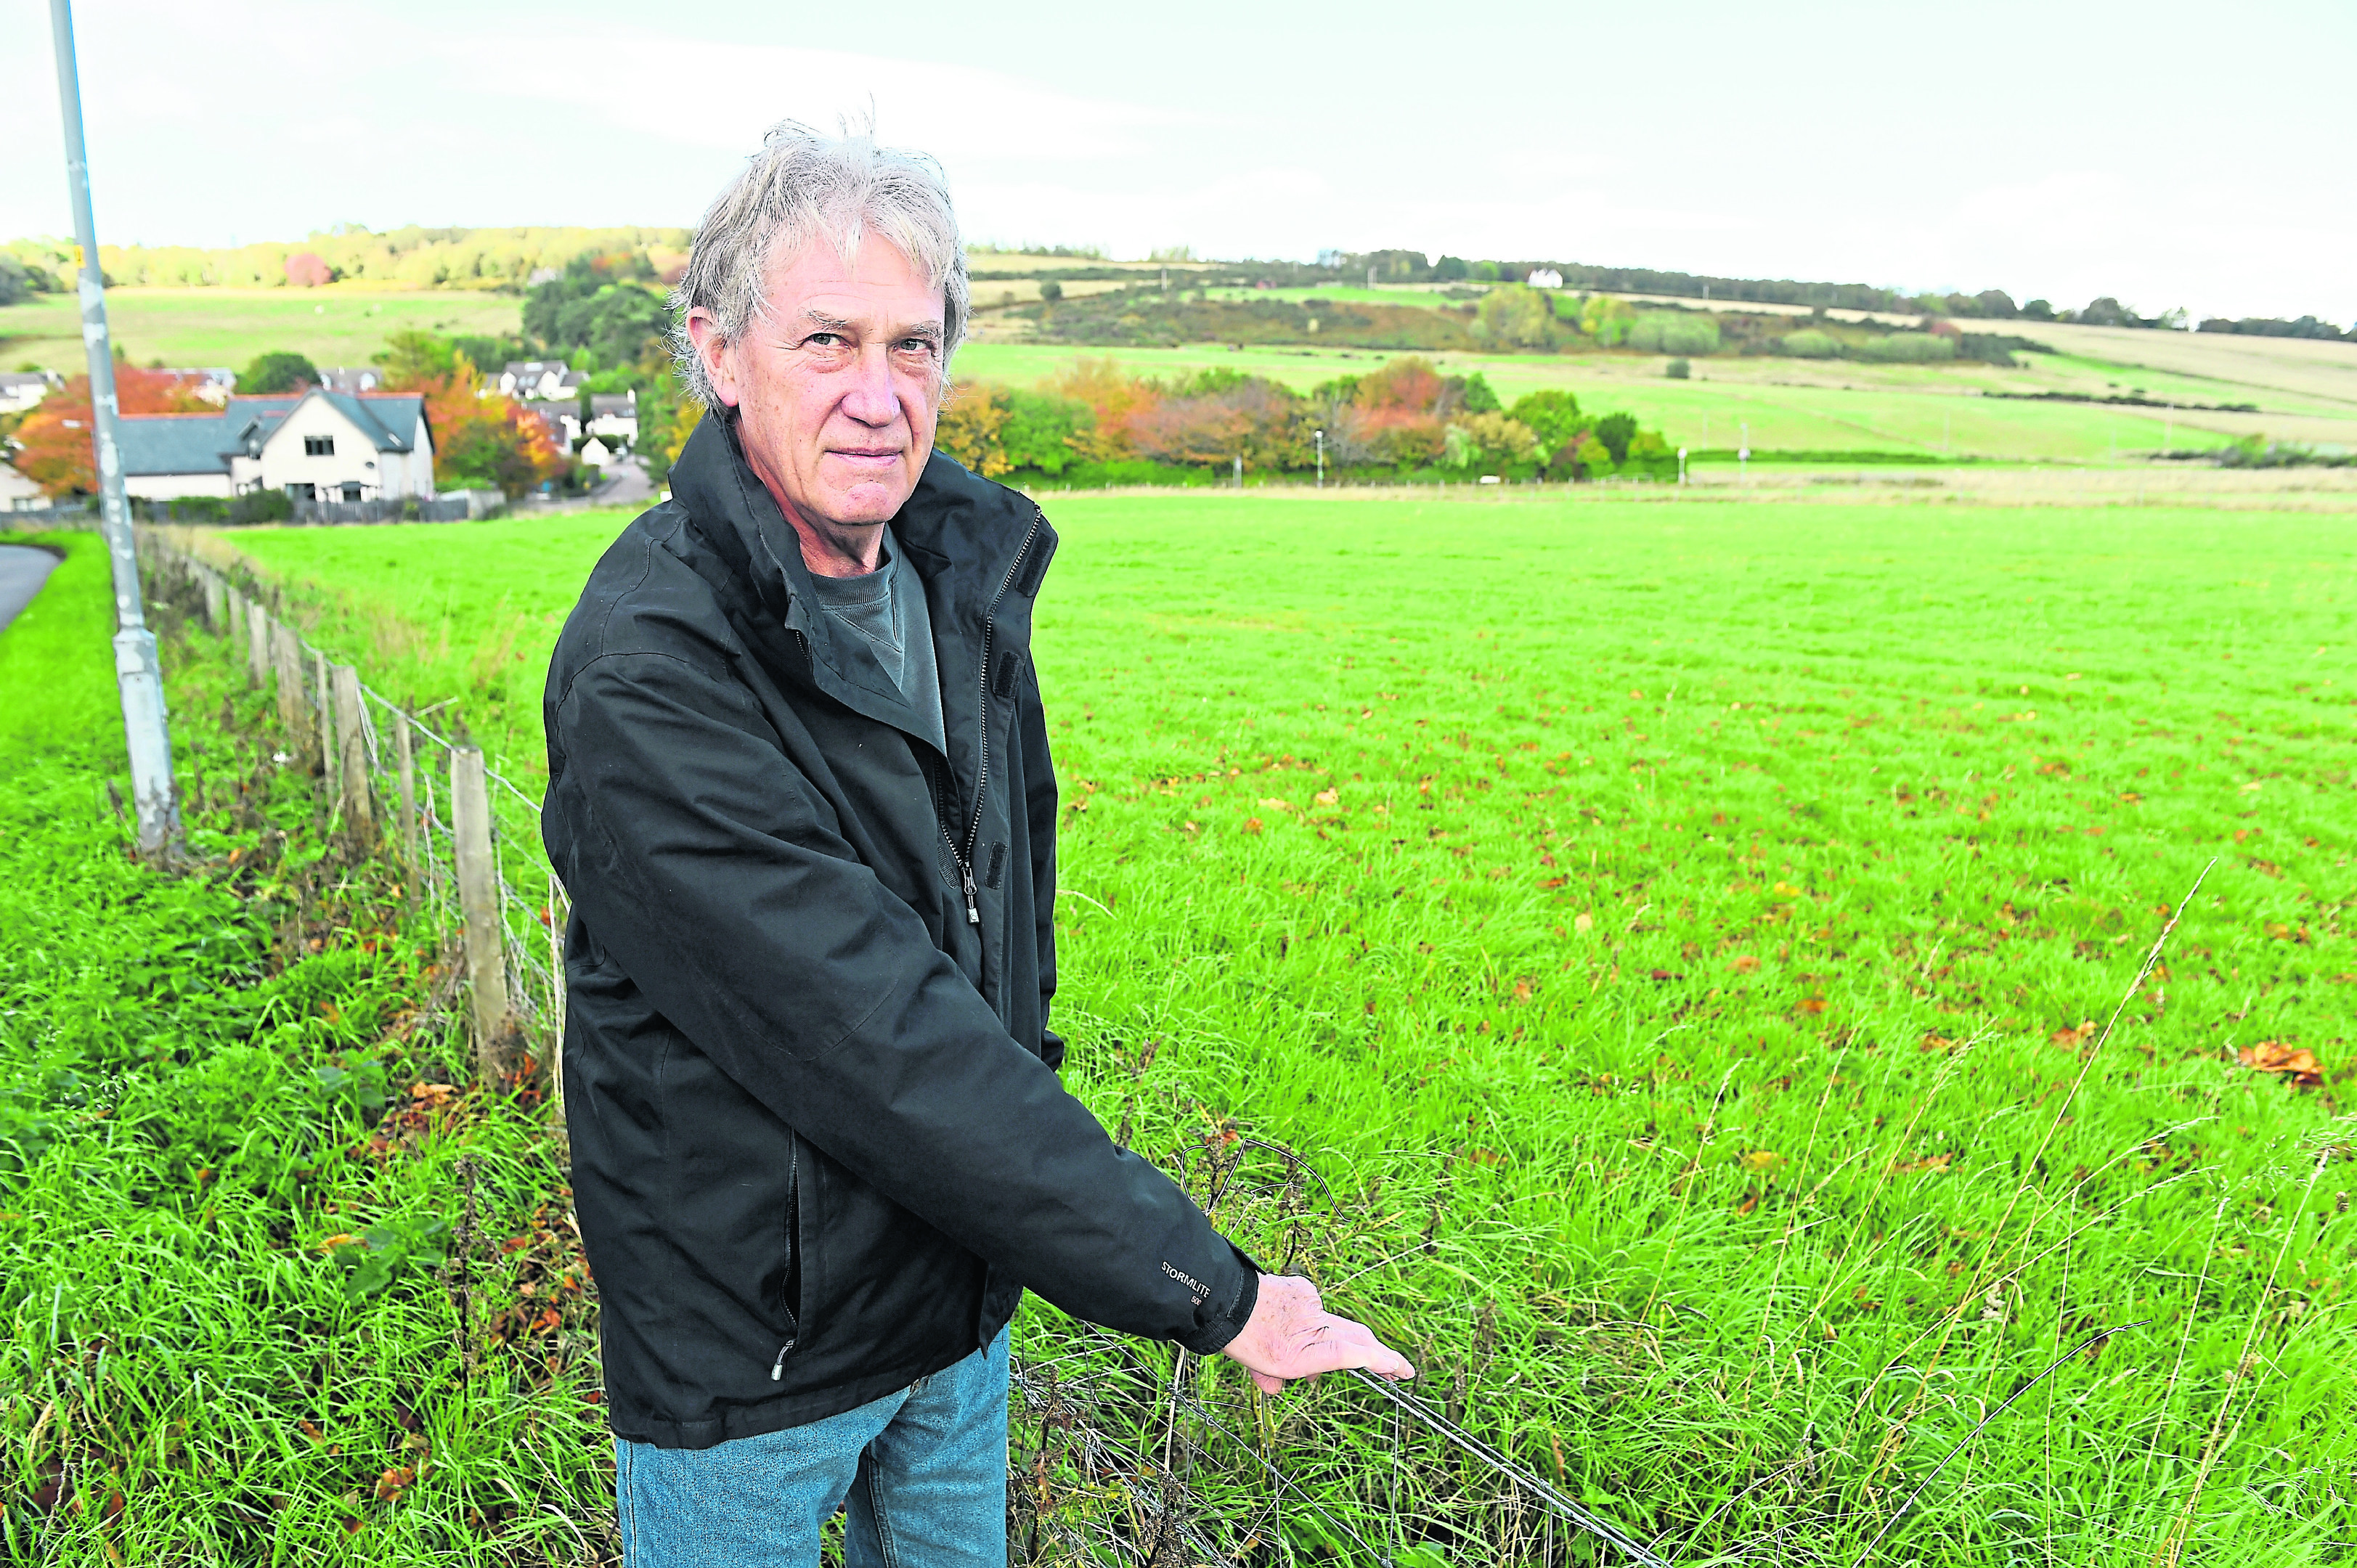 Fortrose Community Council Chairman, Tom Heath beside the field on the outskirts of Fortrose.